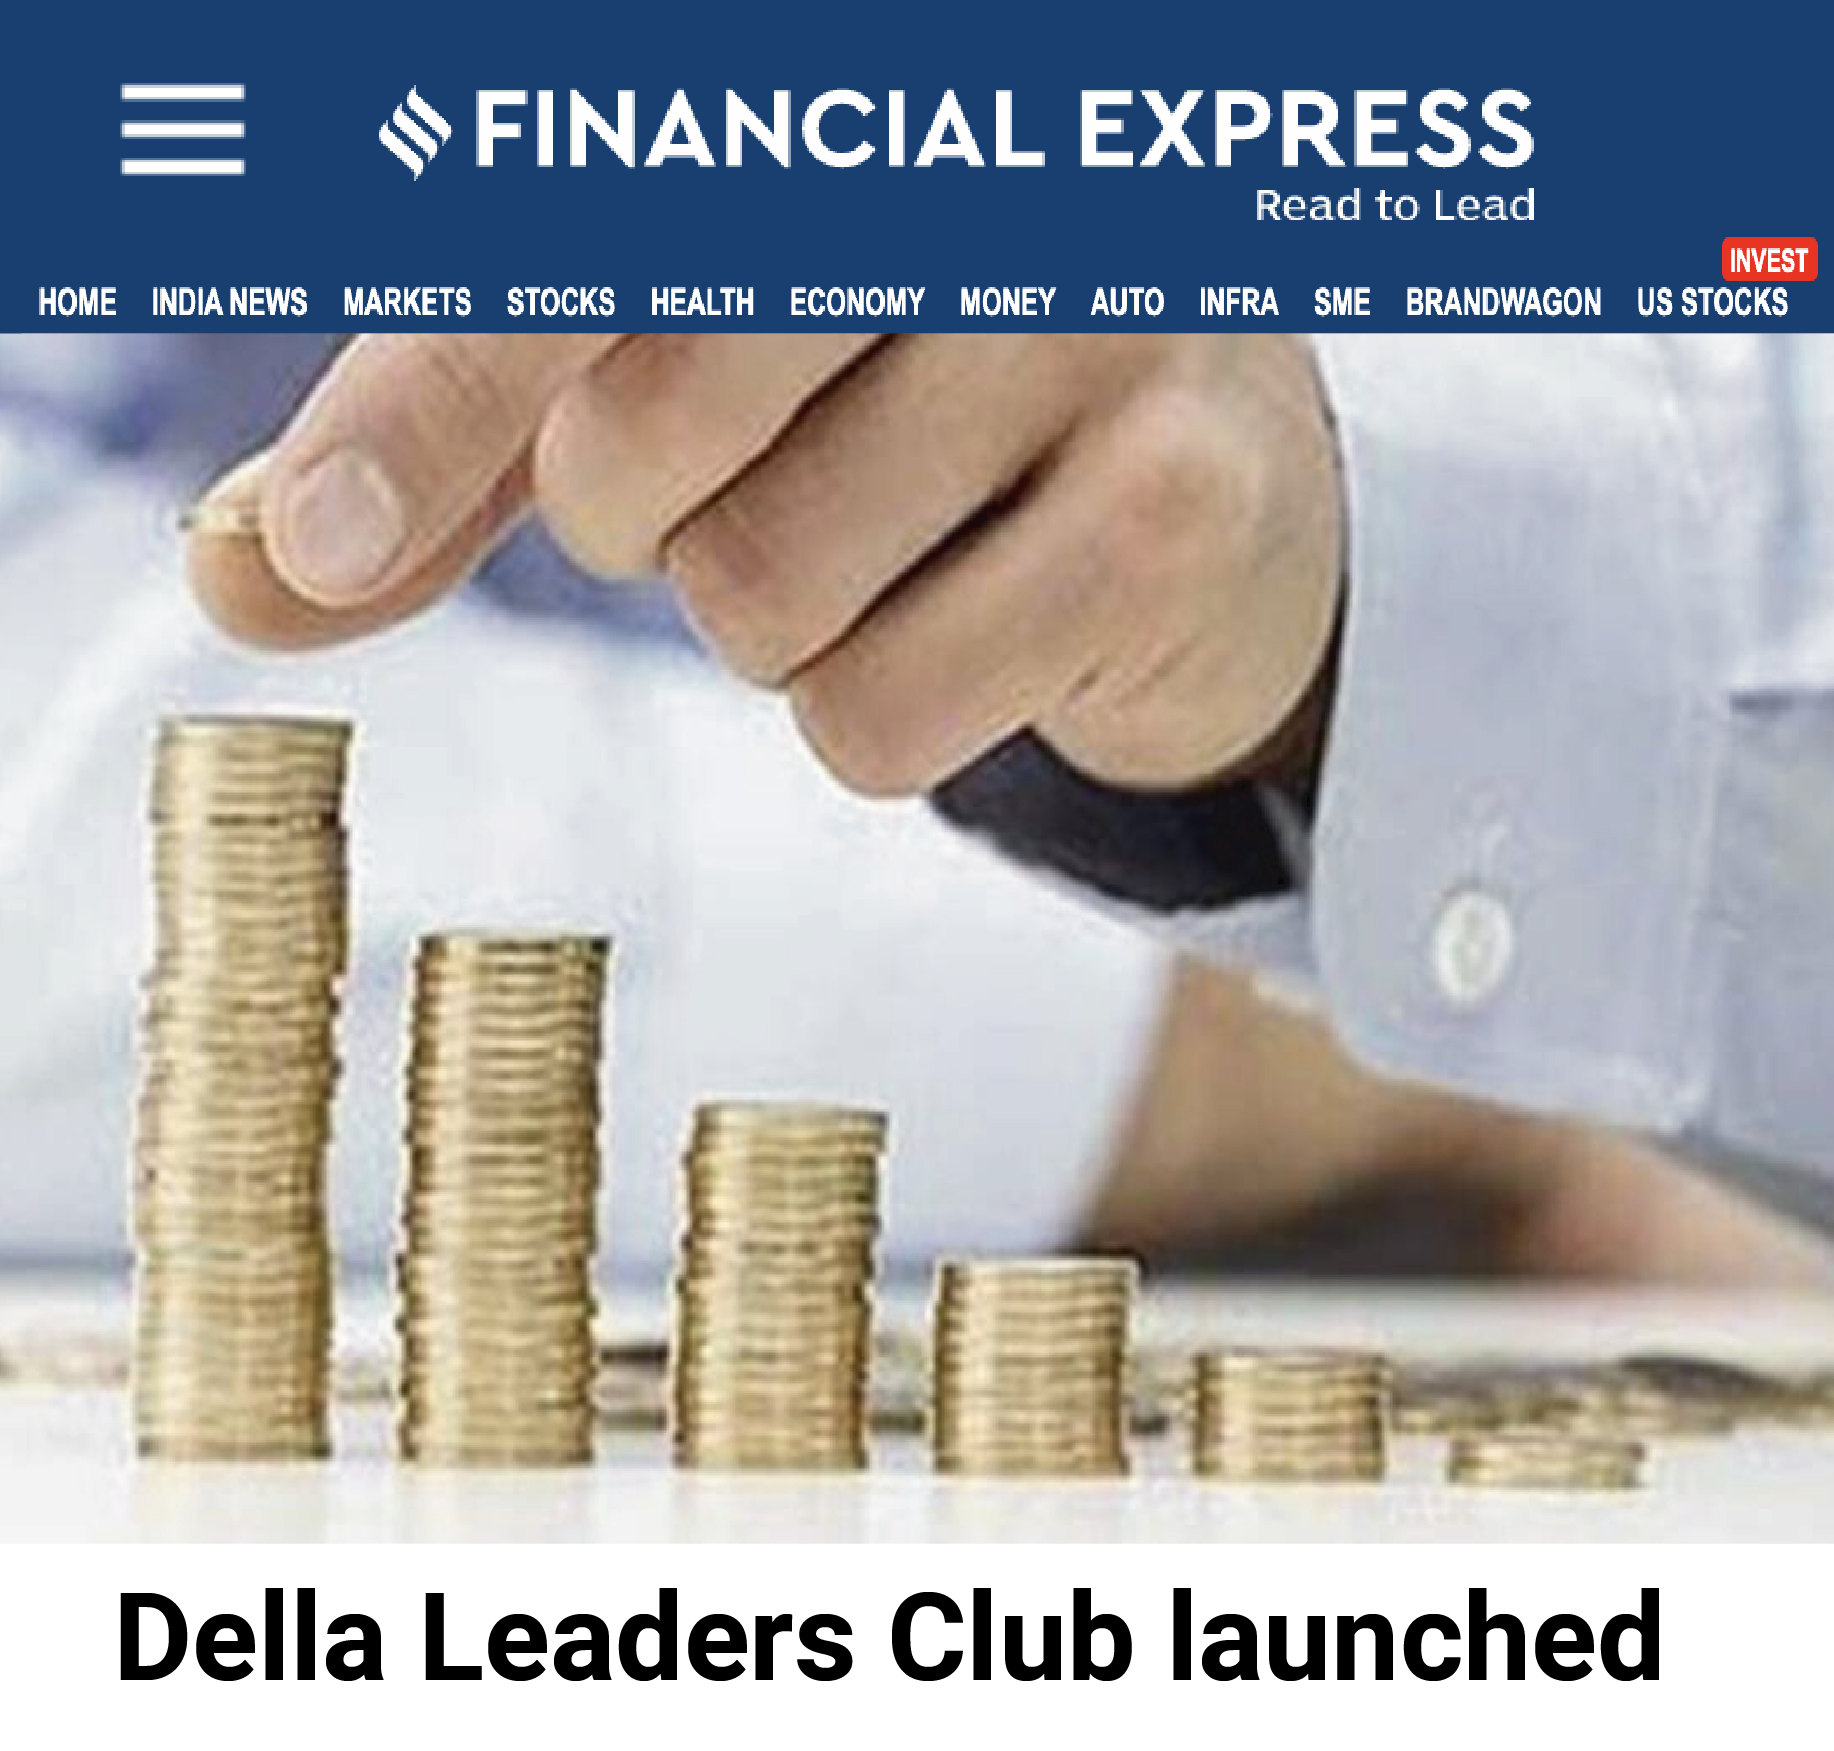 Financial Express featuring Della Leaders Club - Jimmy Mistry Launches World’s First Business Platform, DLC